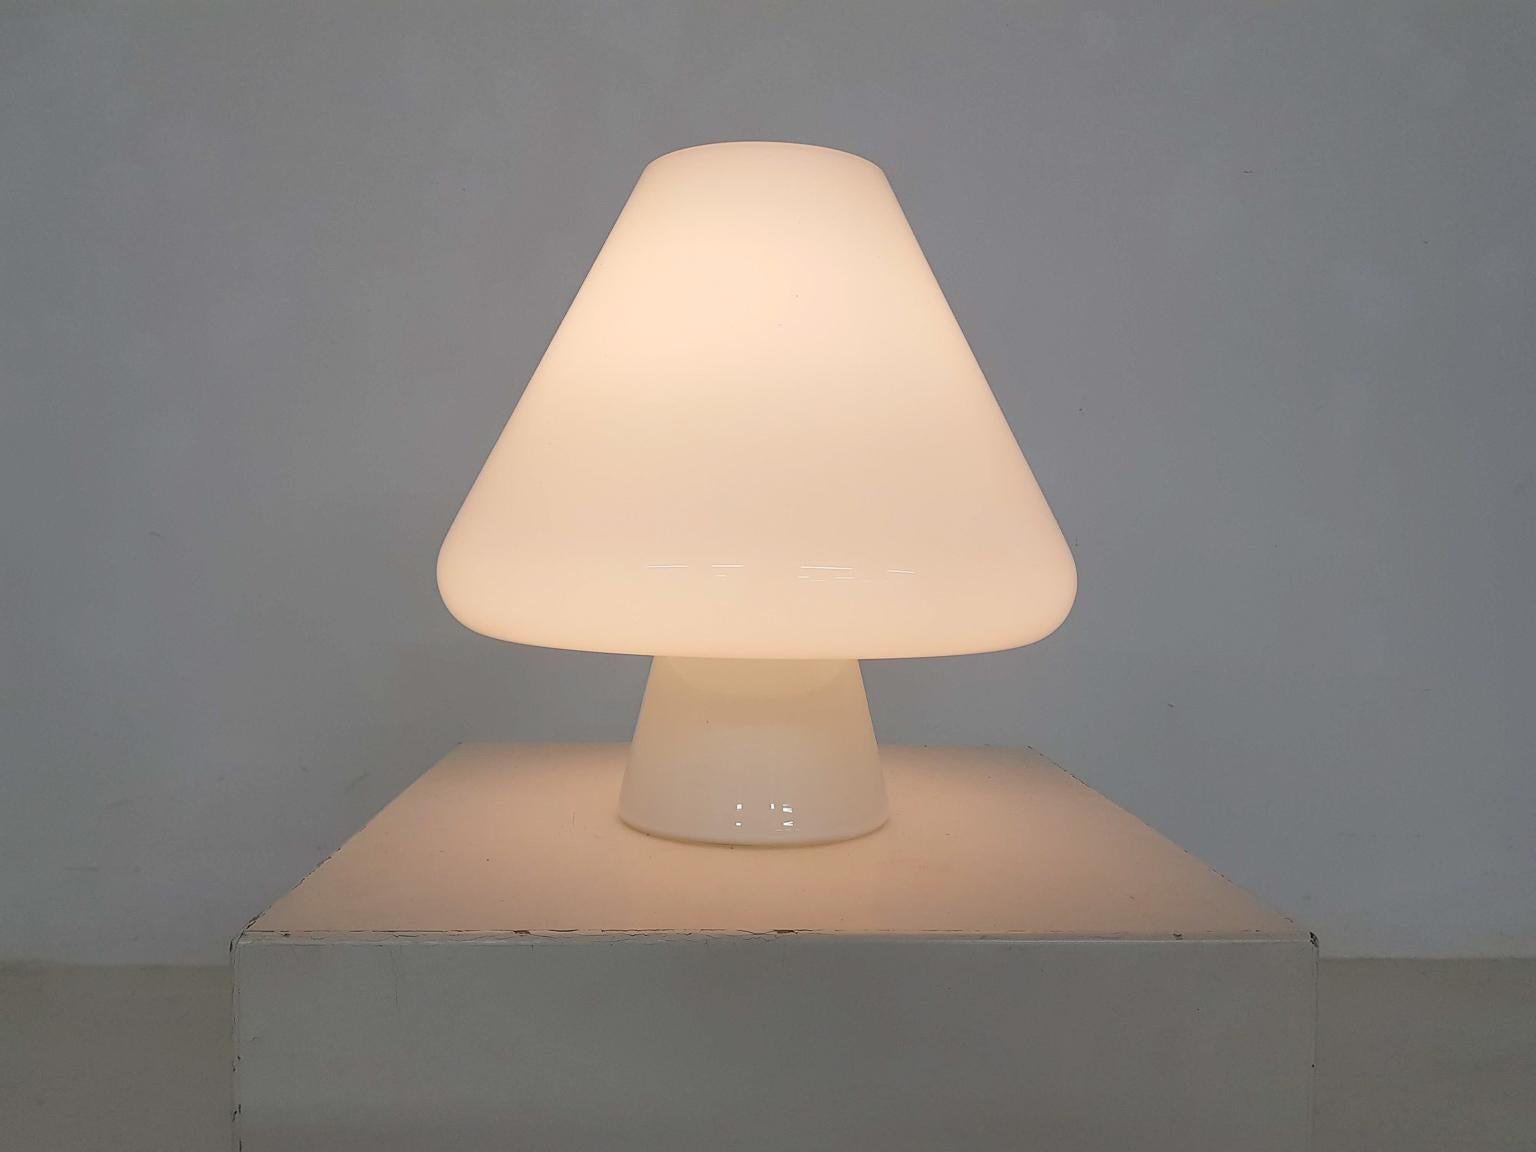 Glass mushroom shaped table, desk or floor lamp in the style of Vistosi and Venini Murano, dated 1960s.

Lamp is made of beautiful opaline glass, which gives a nice glow when switched on. We haven't found its maker yet, but the light has many